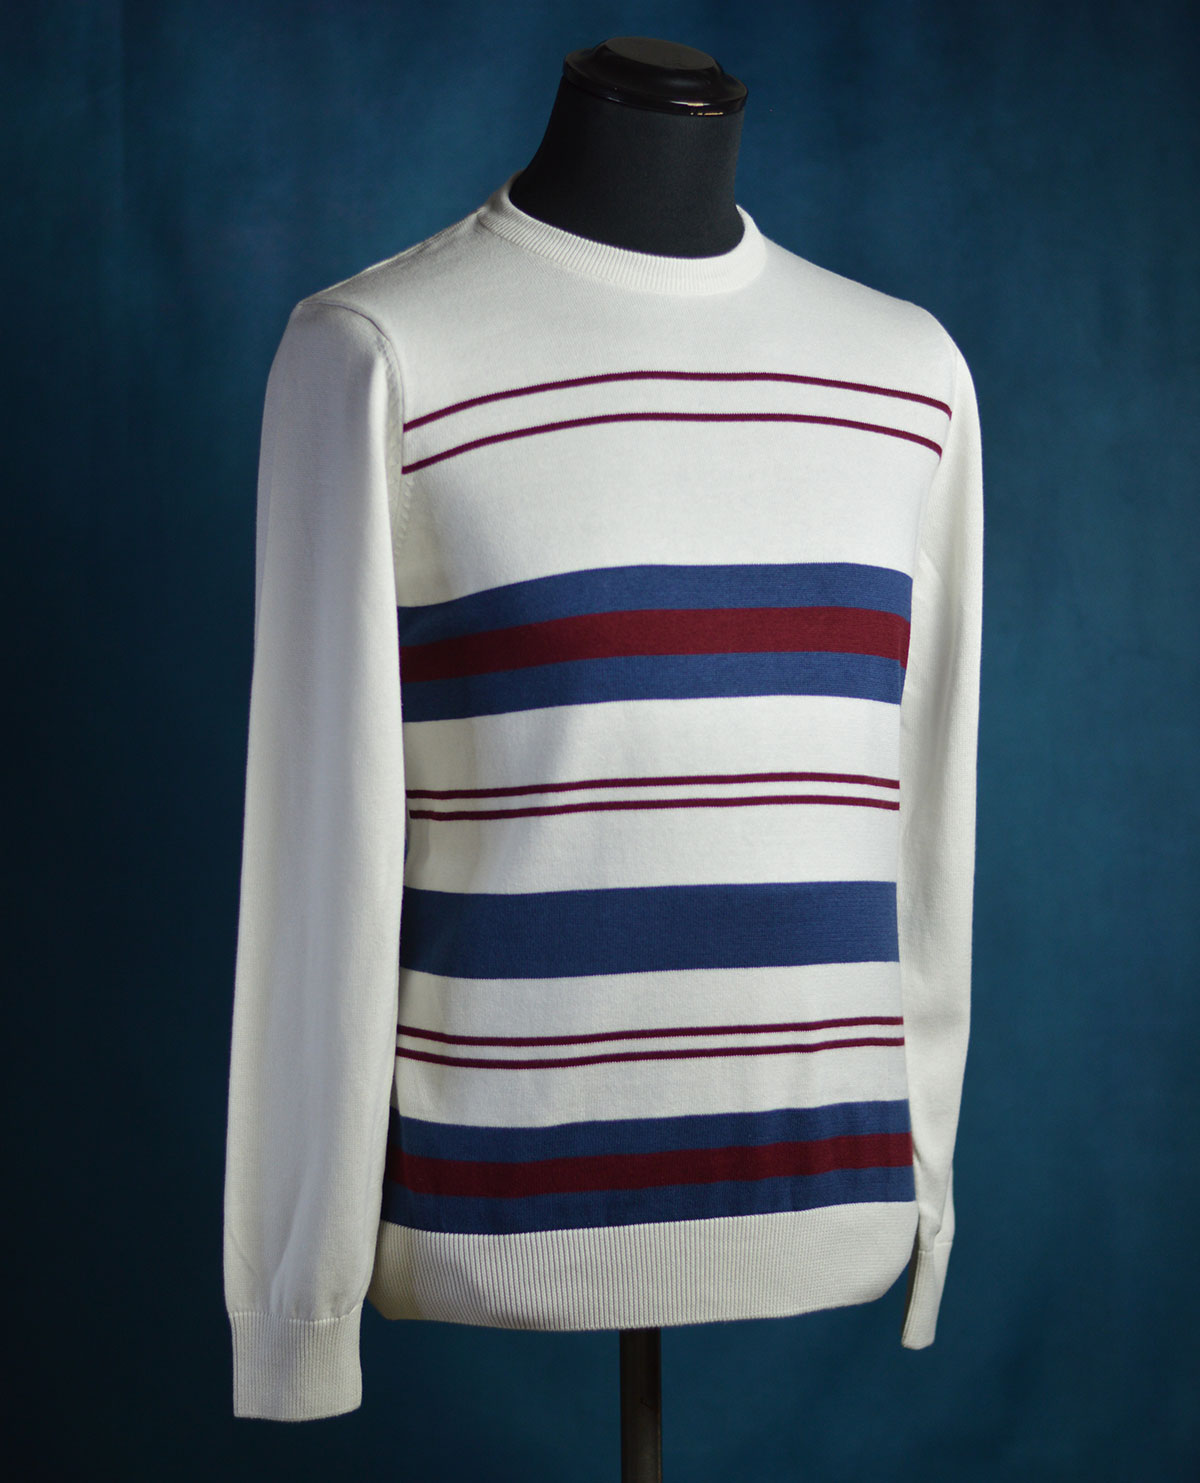 The ‘Minds Eye’ – Ronnie Lane Small Faces Inspired Jumper – Mod Shoes